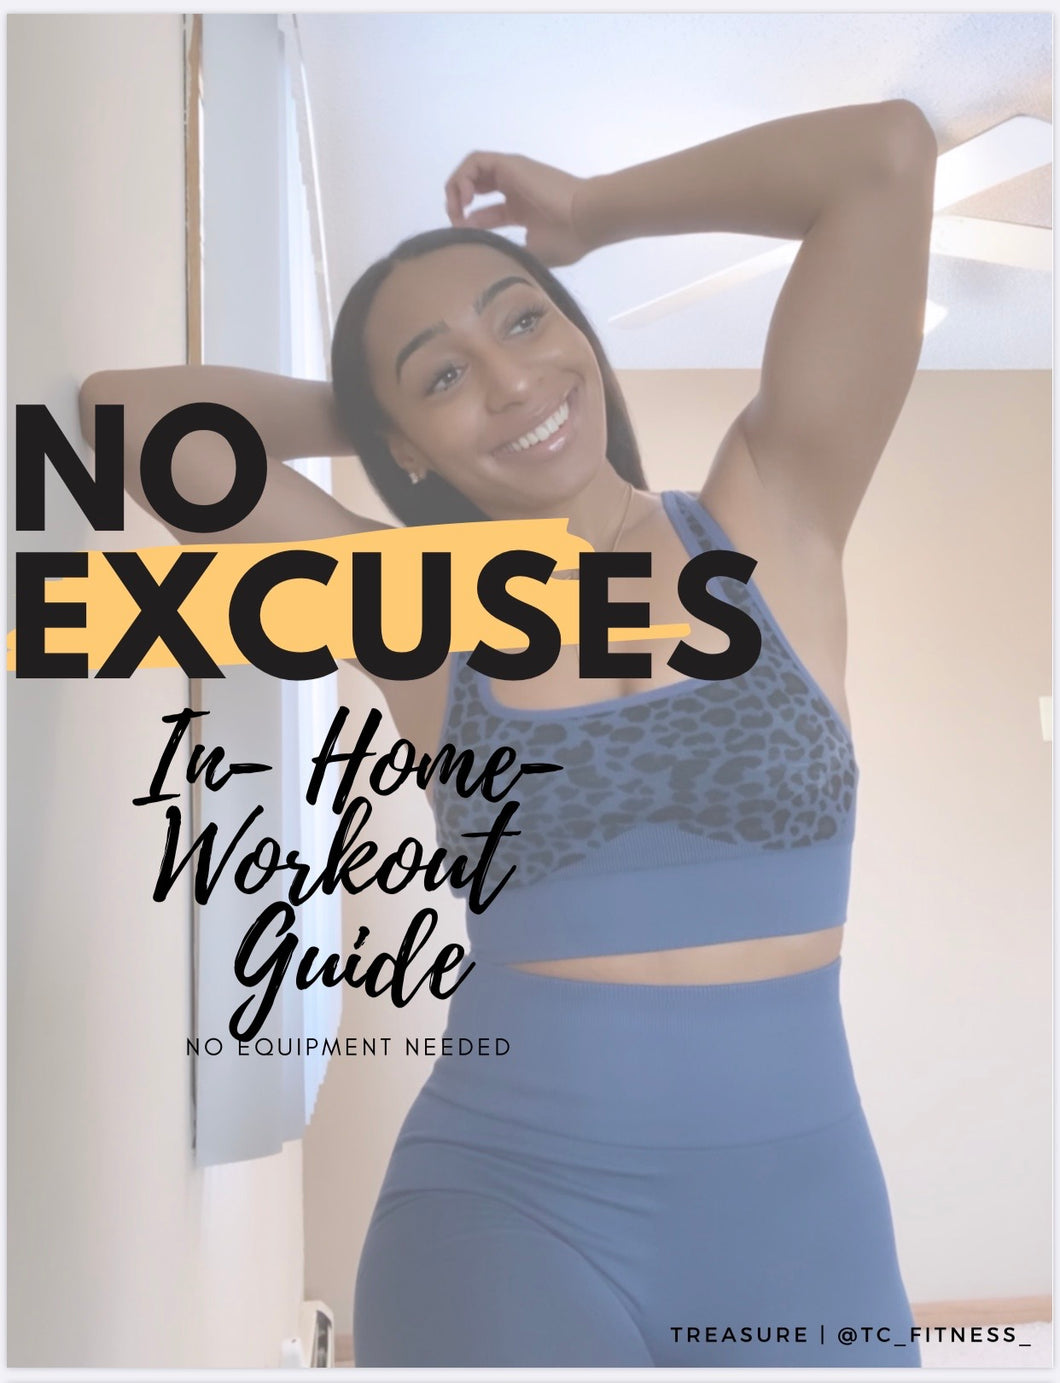 NO EXCUSES-HOME WORKOUT GUIDE